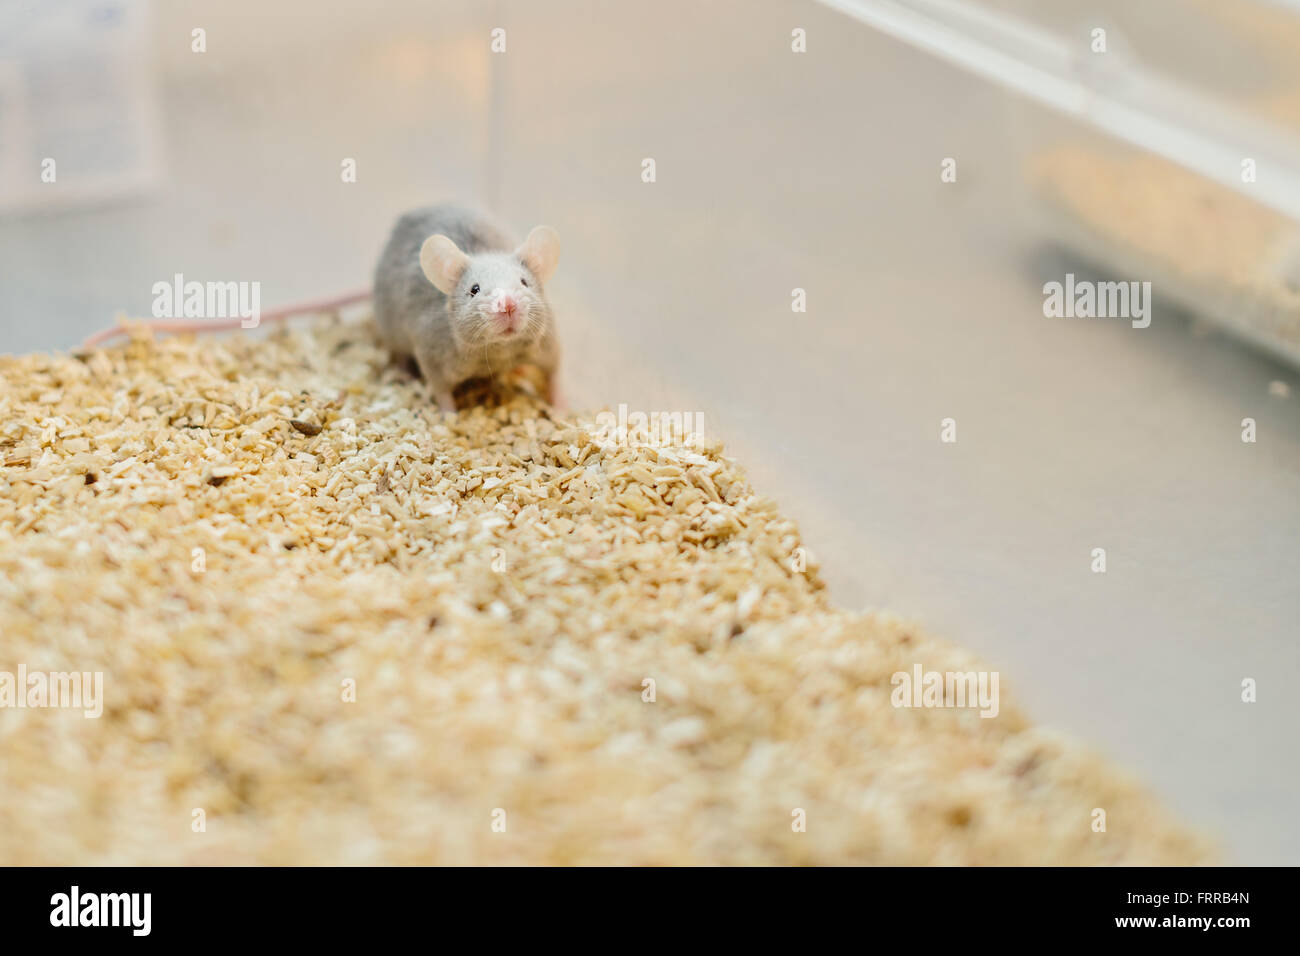 https://c8.alamy.com/comp/FRRB4N/one-lab-mouse-alone-in-his-cage-on-sawdust-sniffing-and-looking-FRRB4N.jpg